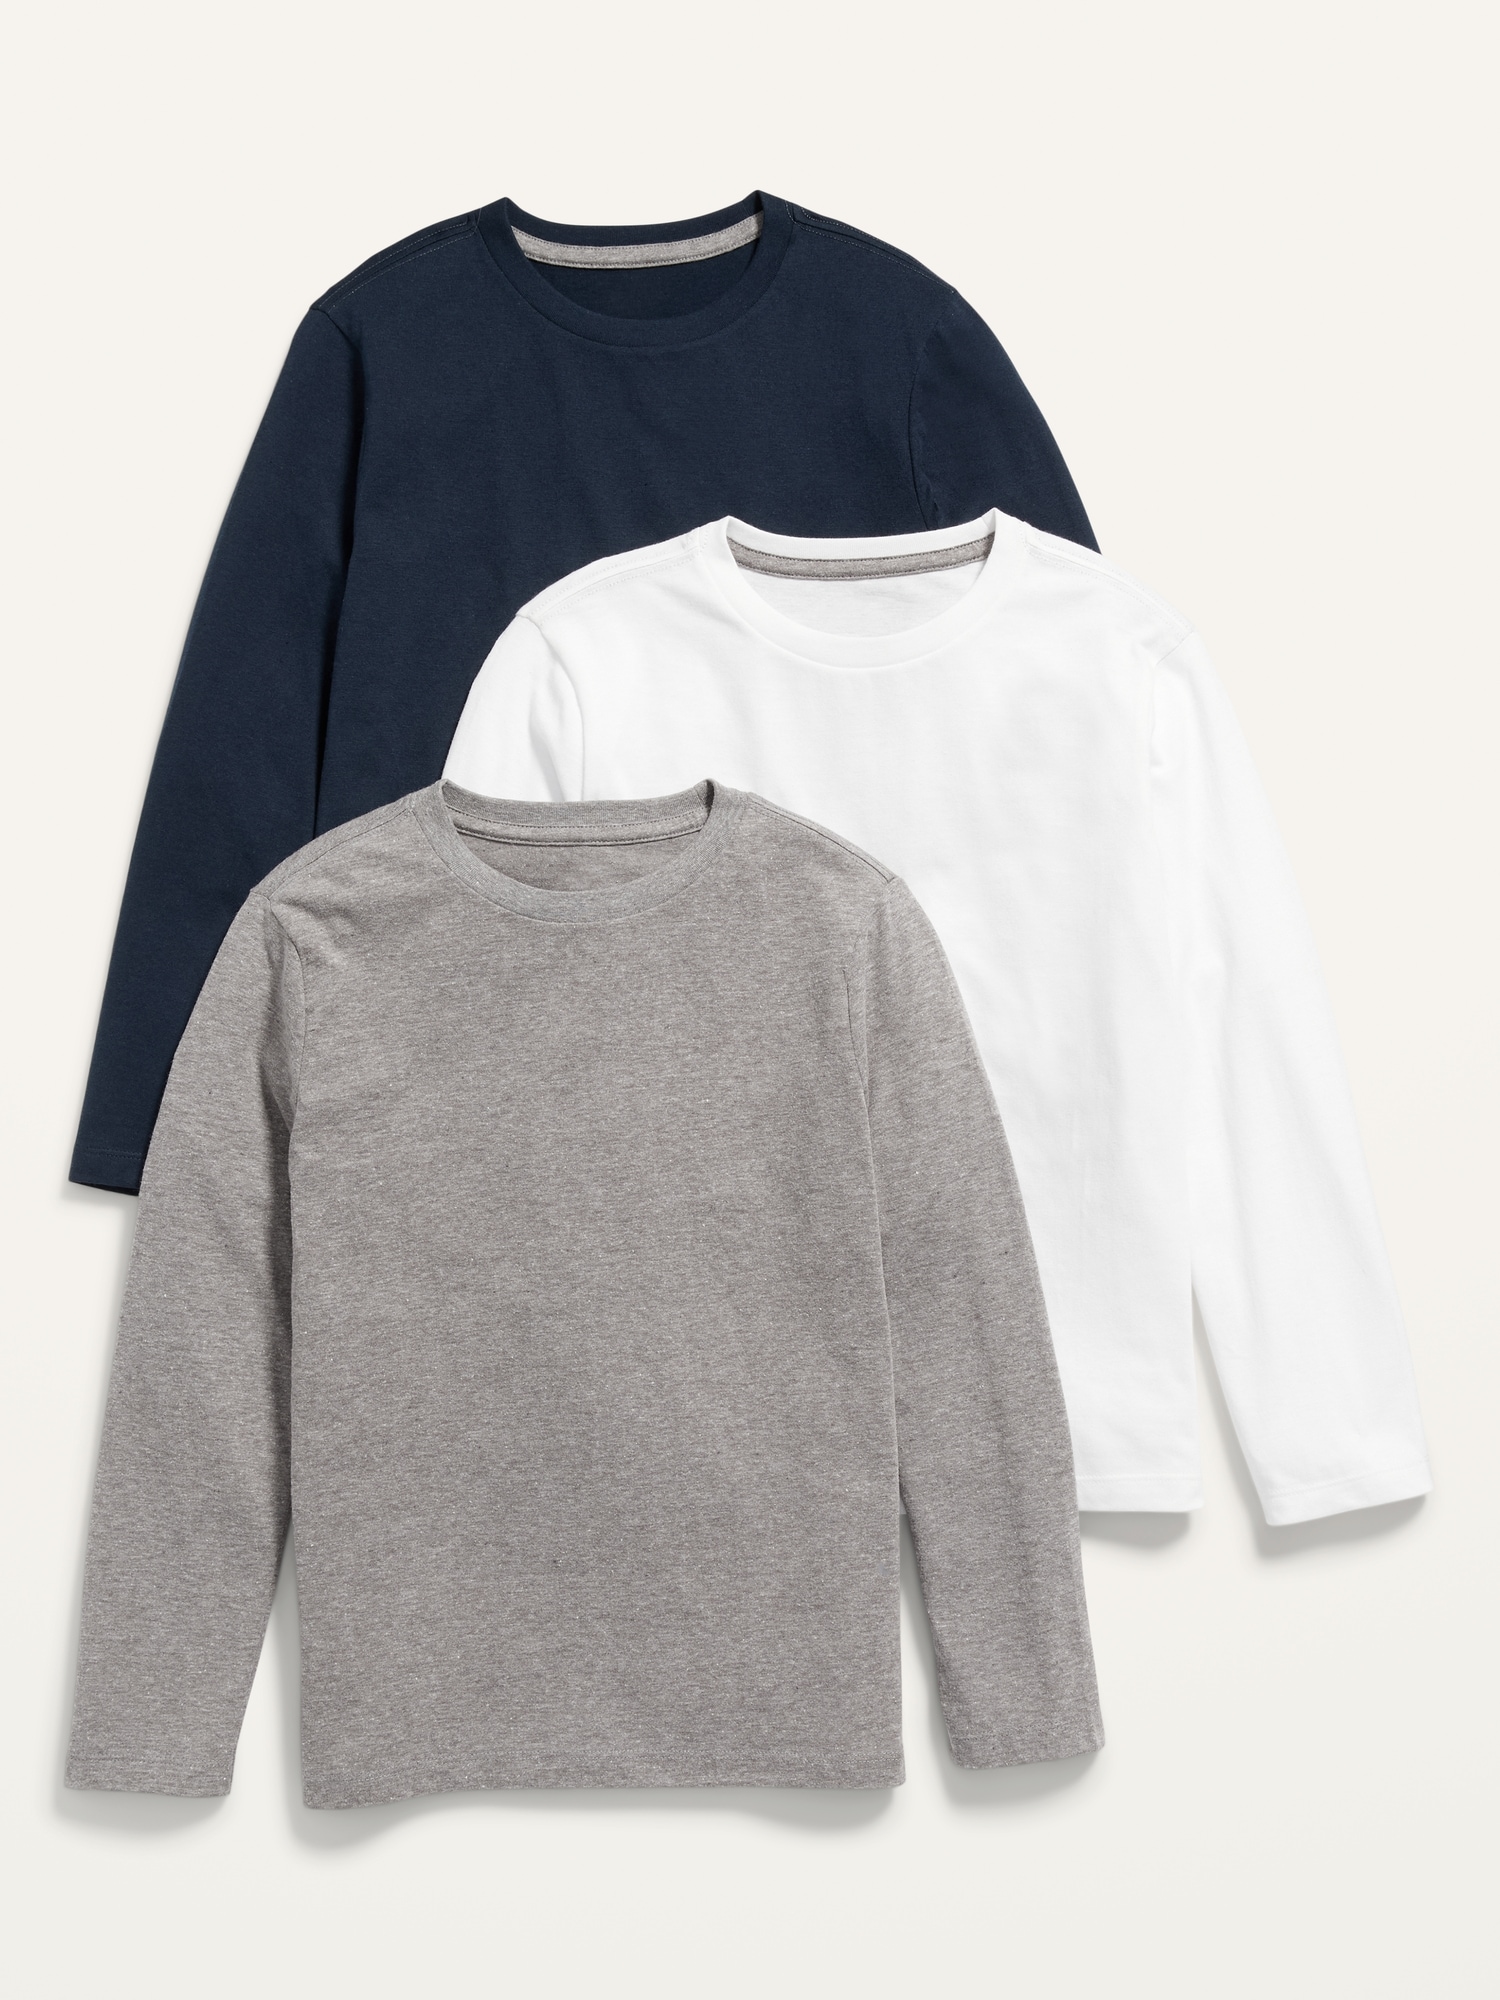 Softest Long-Sleeve T-Shirt 3-Pack for Boys | Old Navy